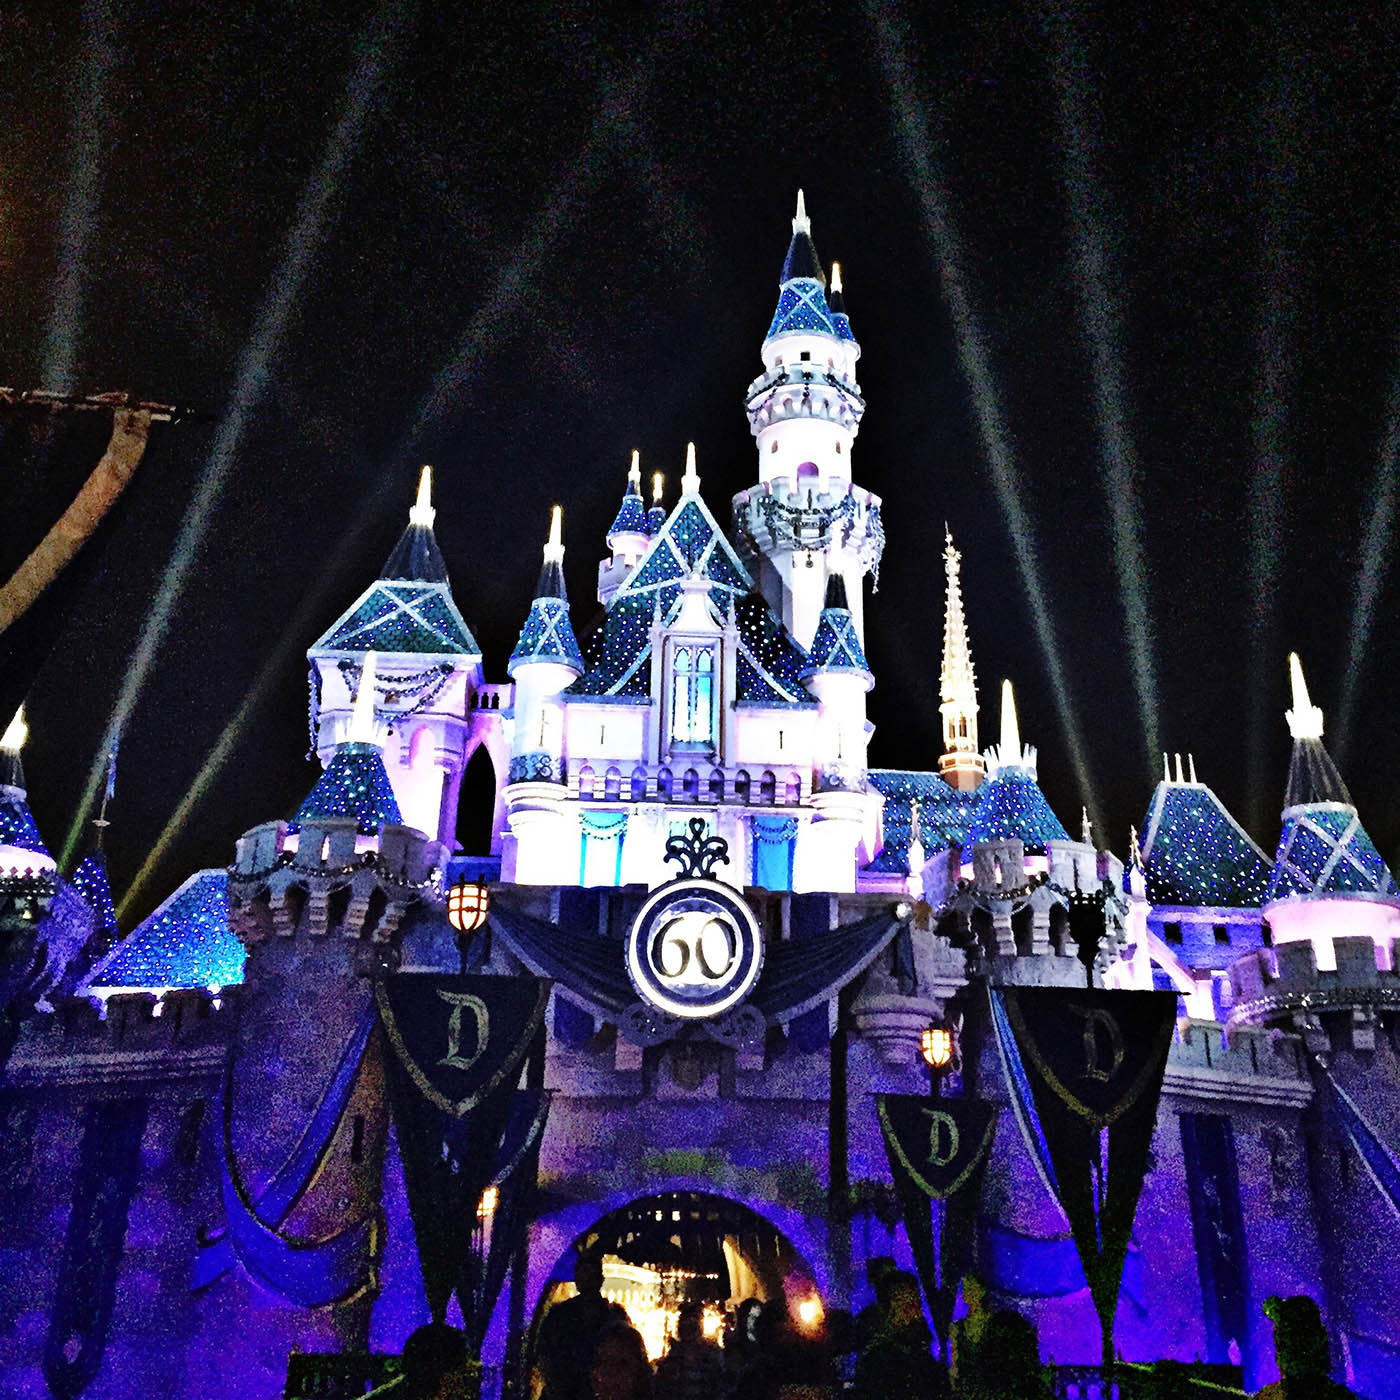 10 reasons you should definitely NOT take your tween or teen to Disneyland this year (a sarcastic post from allfortheboys.com)